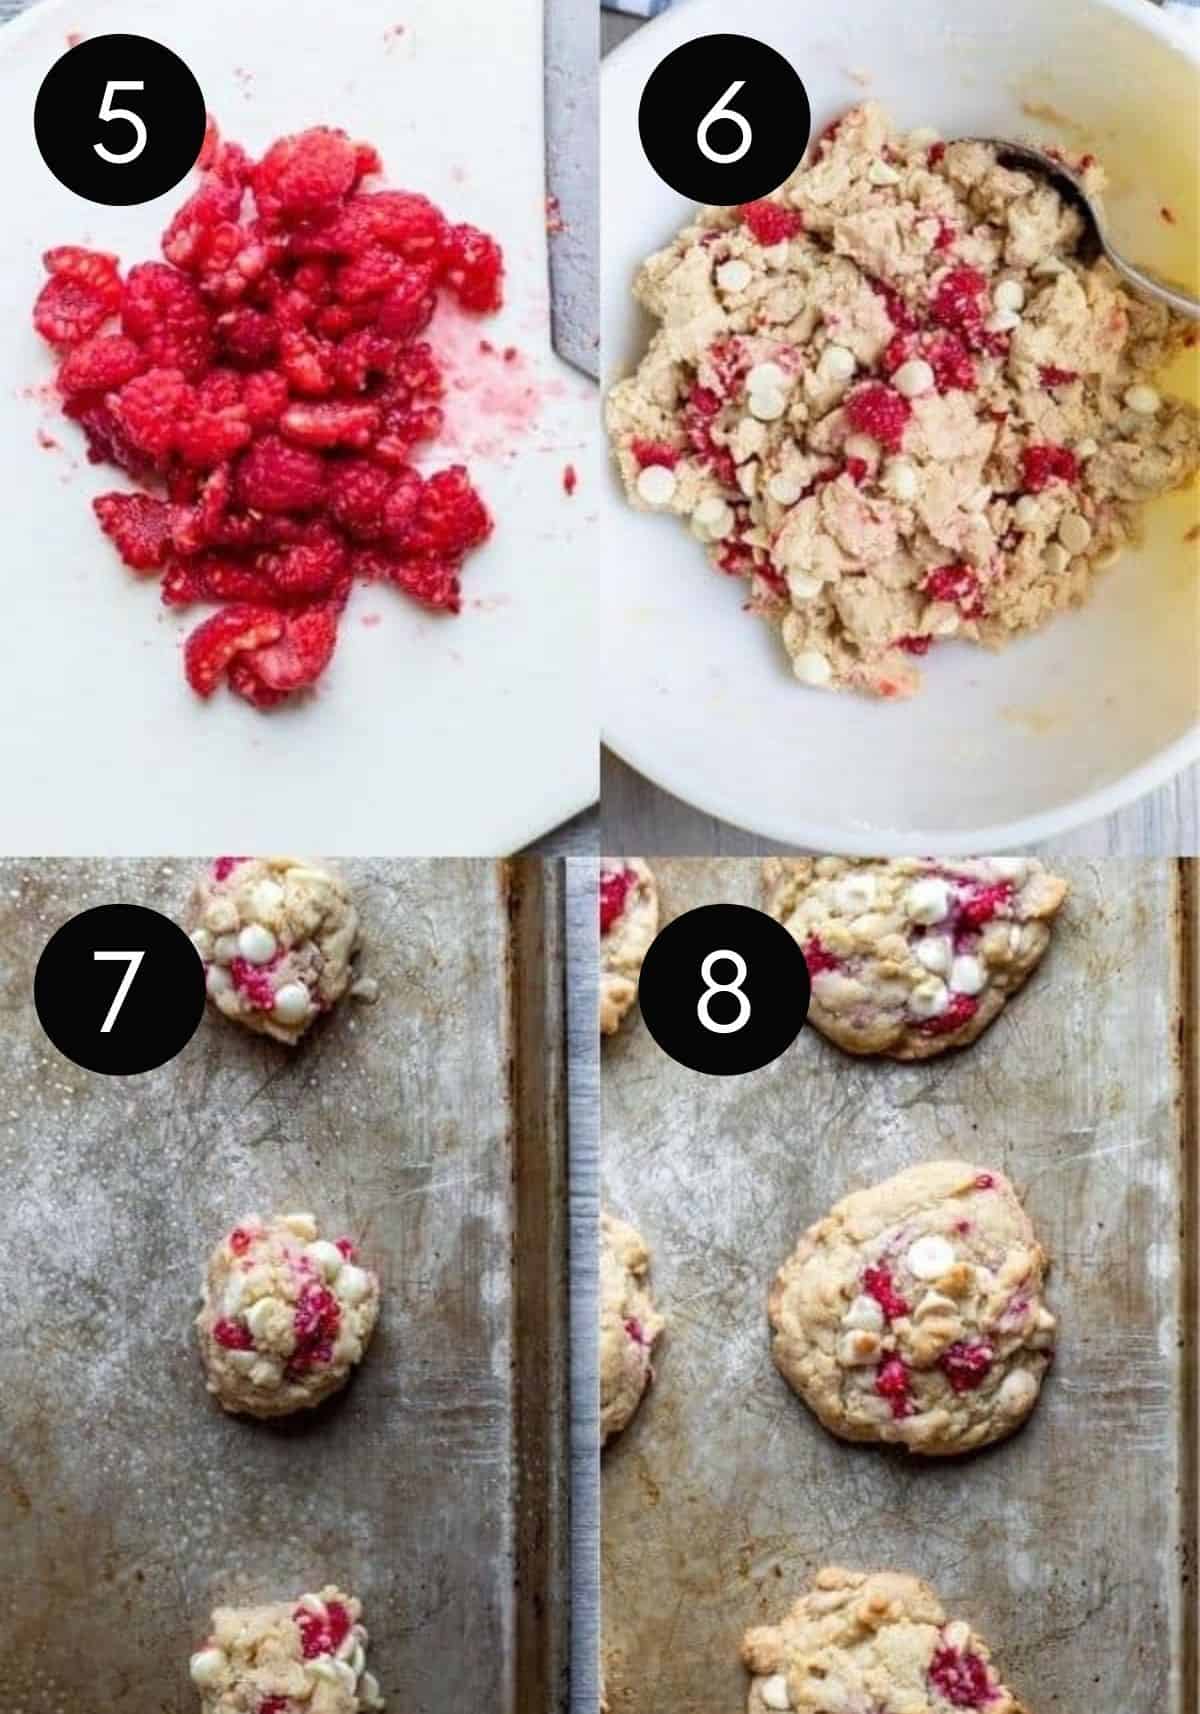 Prep image with four pictures showing raspberry prep and finished cookies.